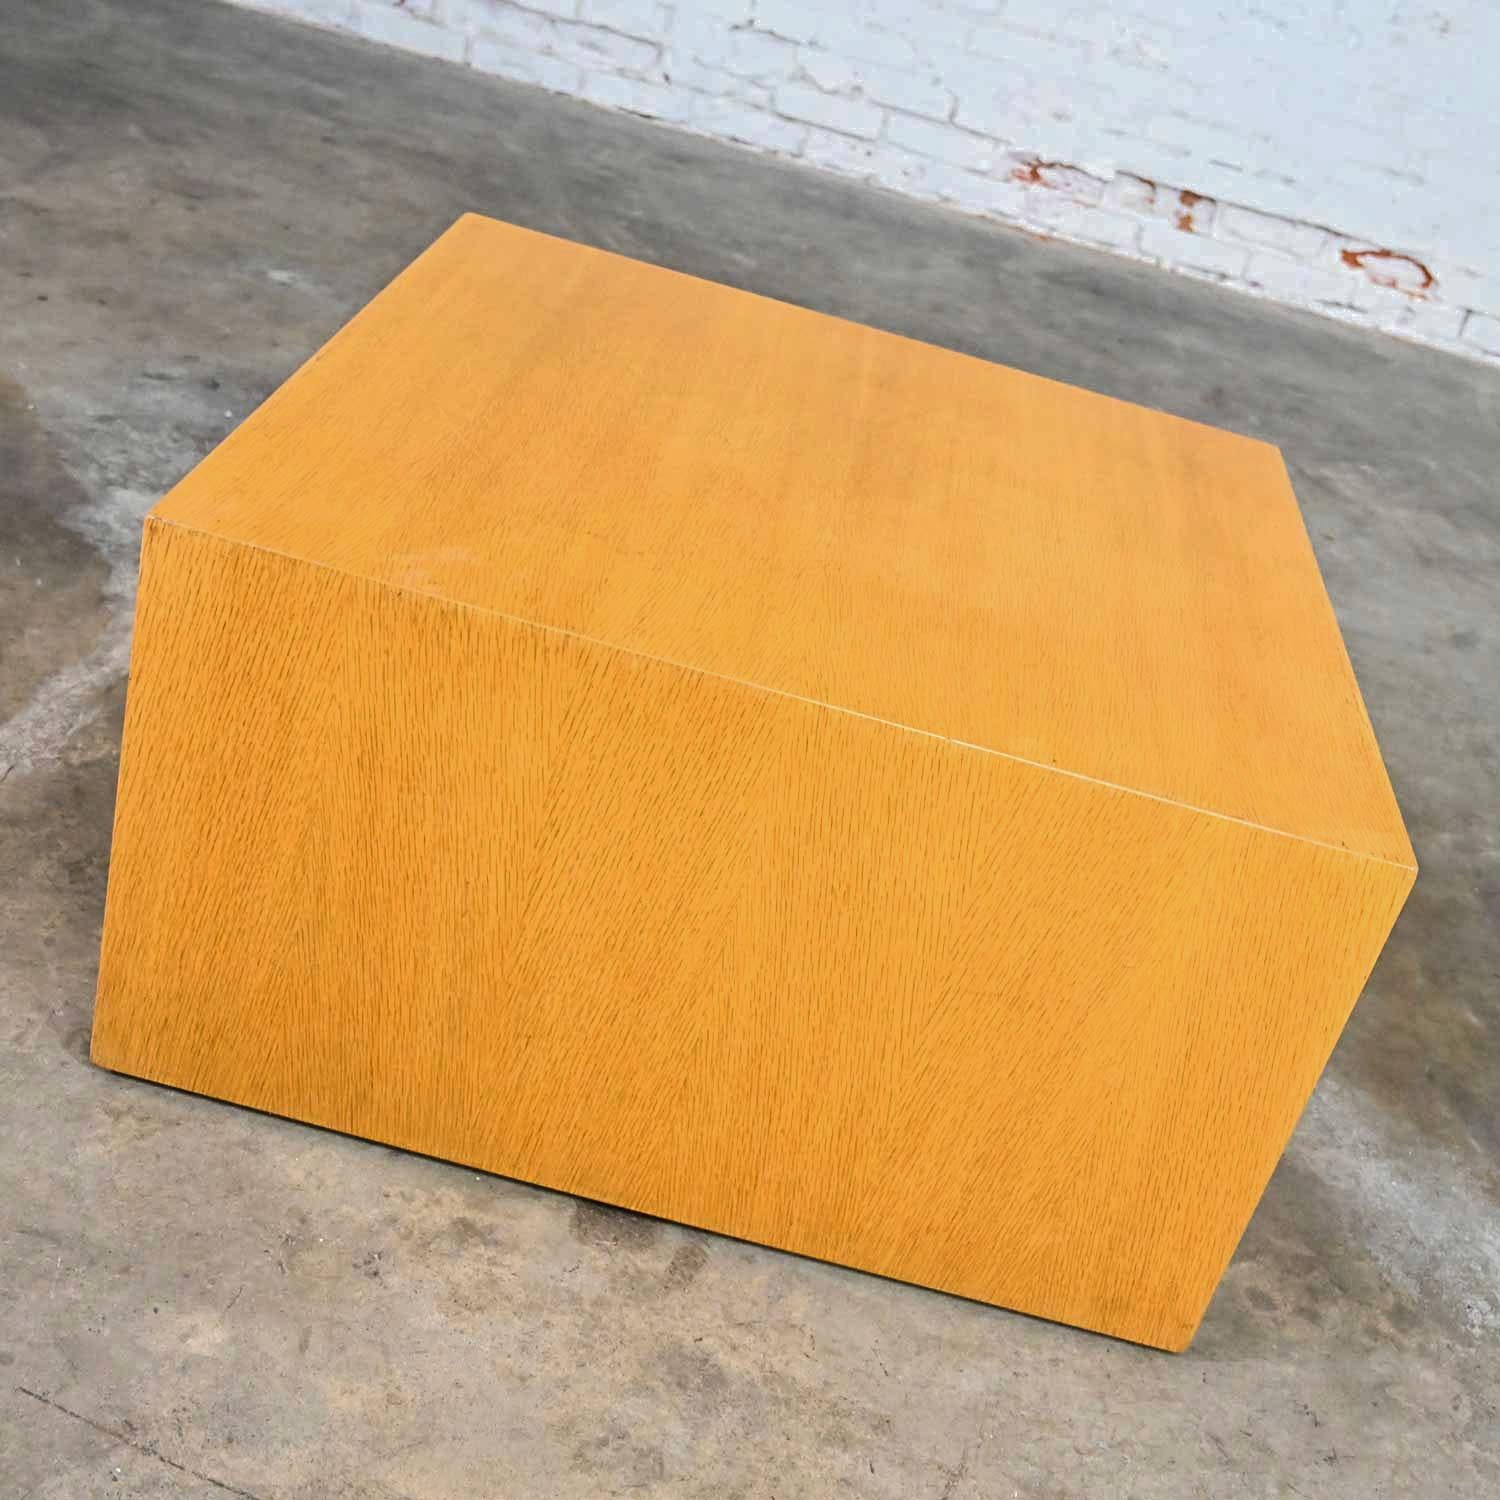 20th Century Intrex Wood Veneer Cube End or Side Table Pedestal Attributed to Paul Mayen For Sale